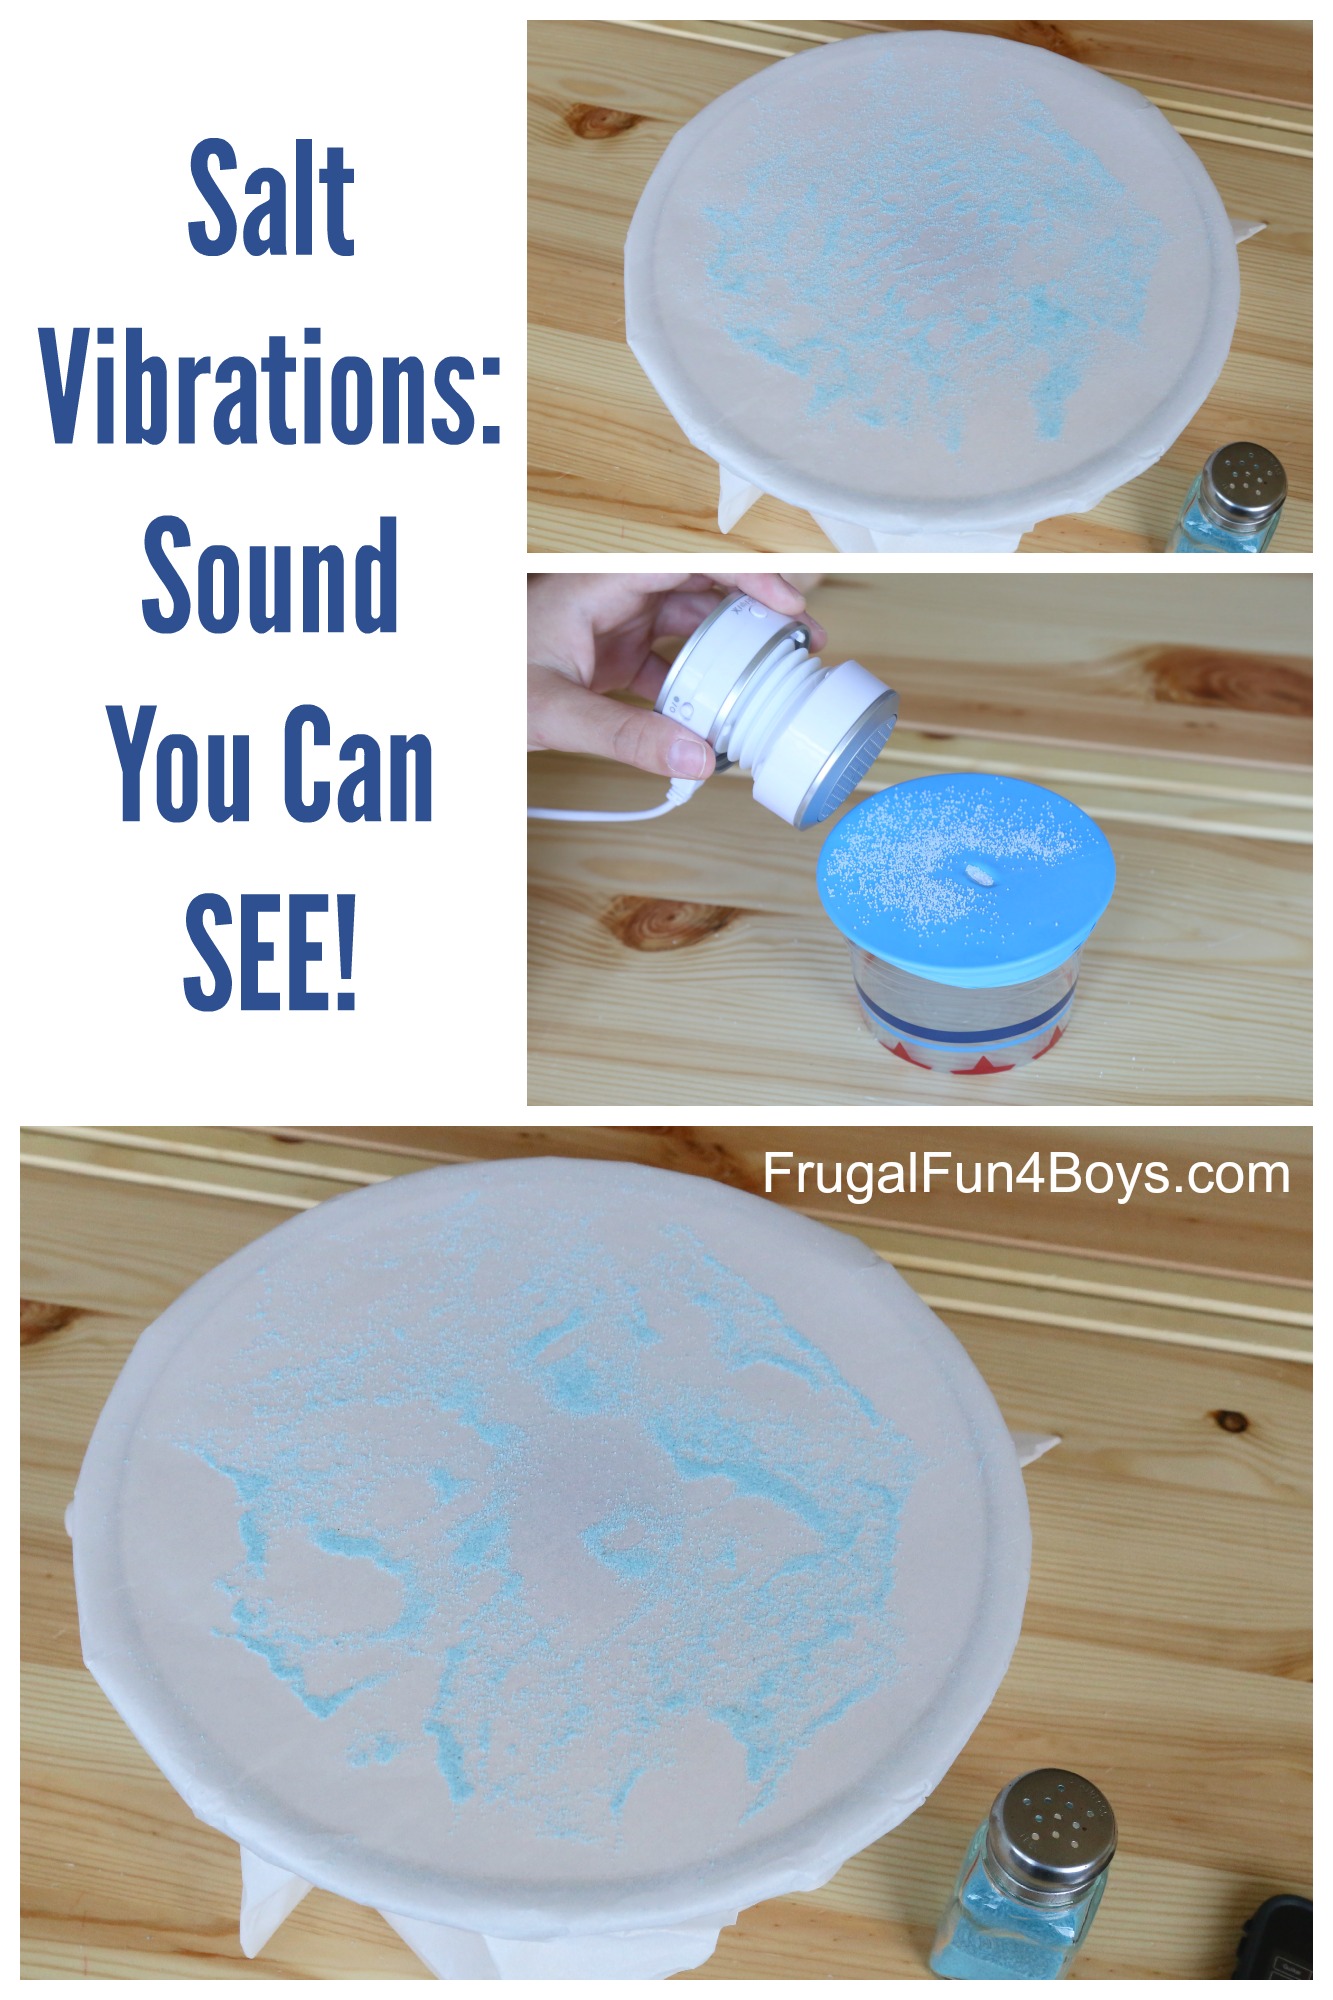 Salt Vibrations:  Sound You Can SEE!